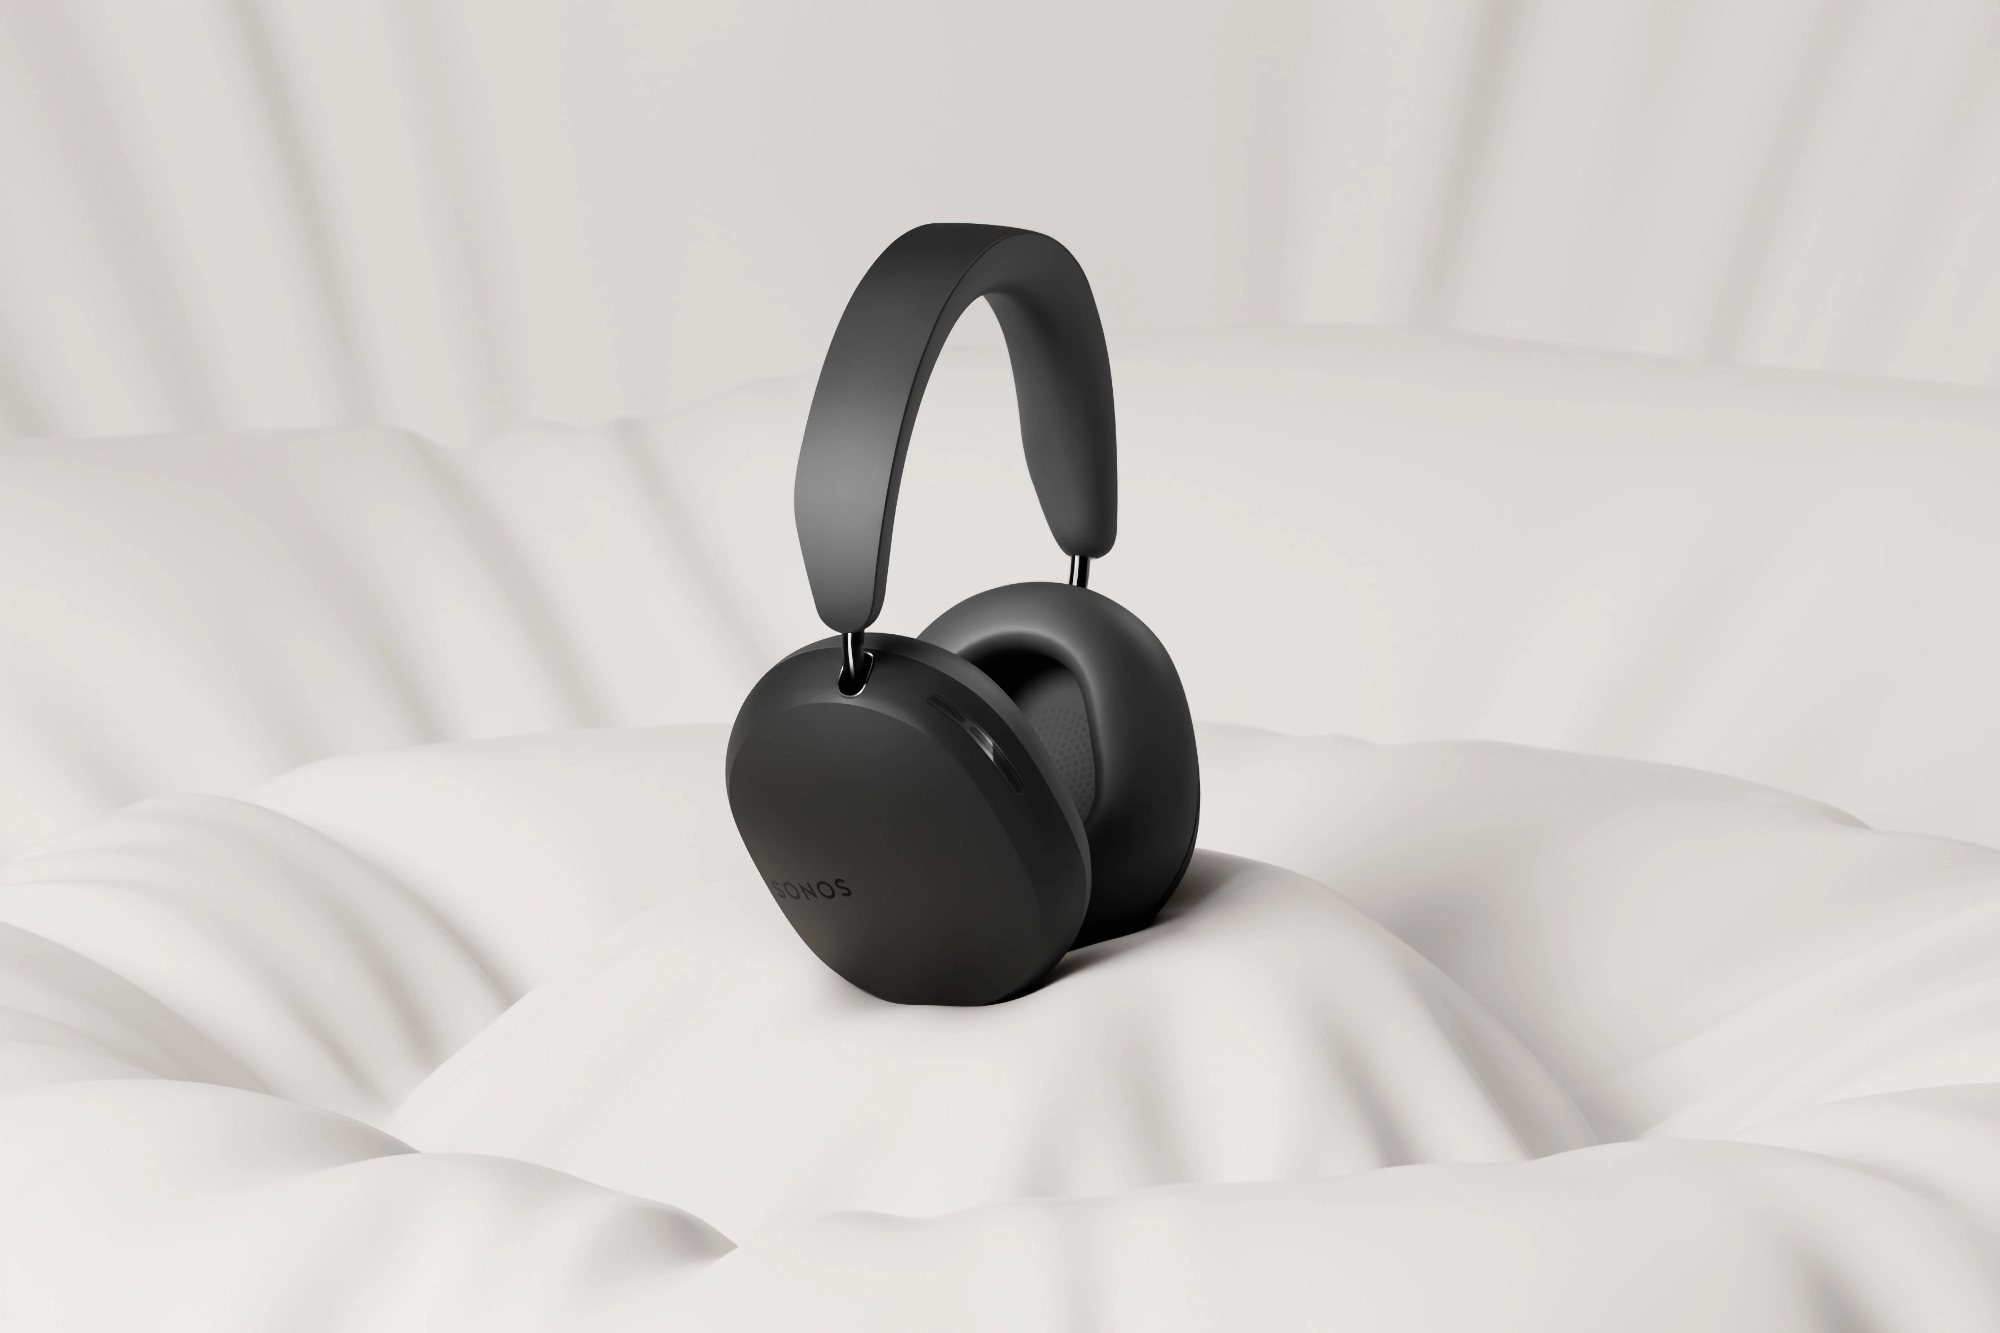 Sonos has unveiled the Ace to compete with Apple's AirPods Max: the brand's first wireless headphones for $449